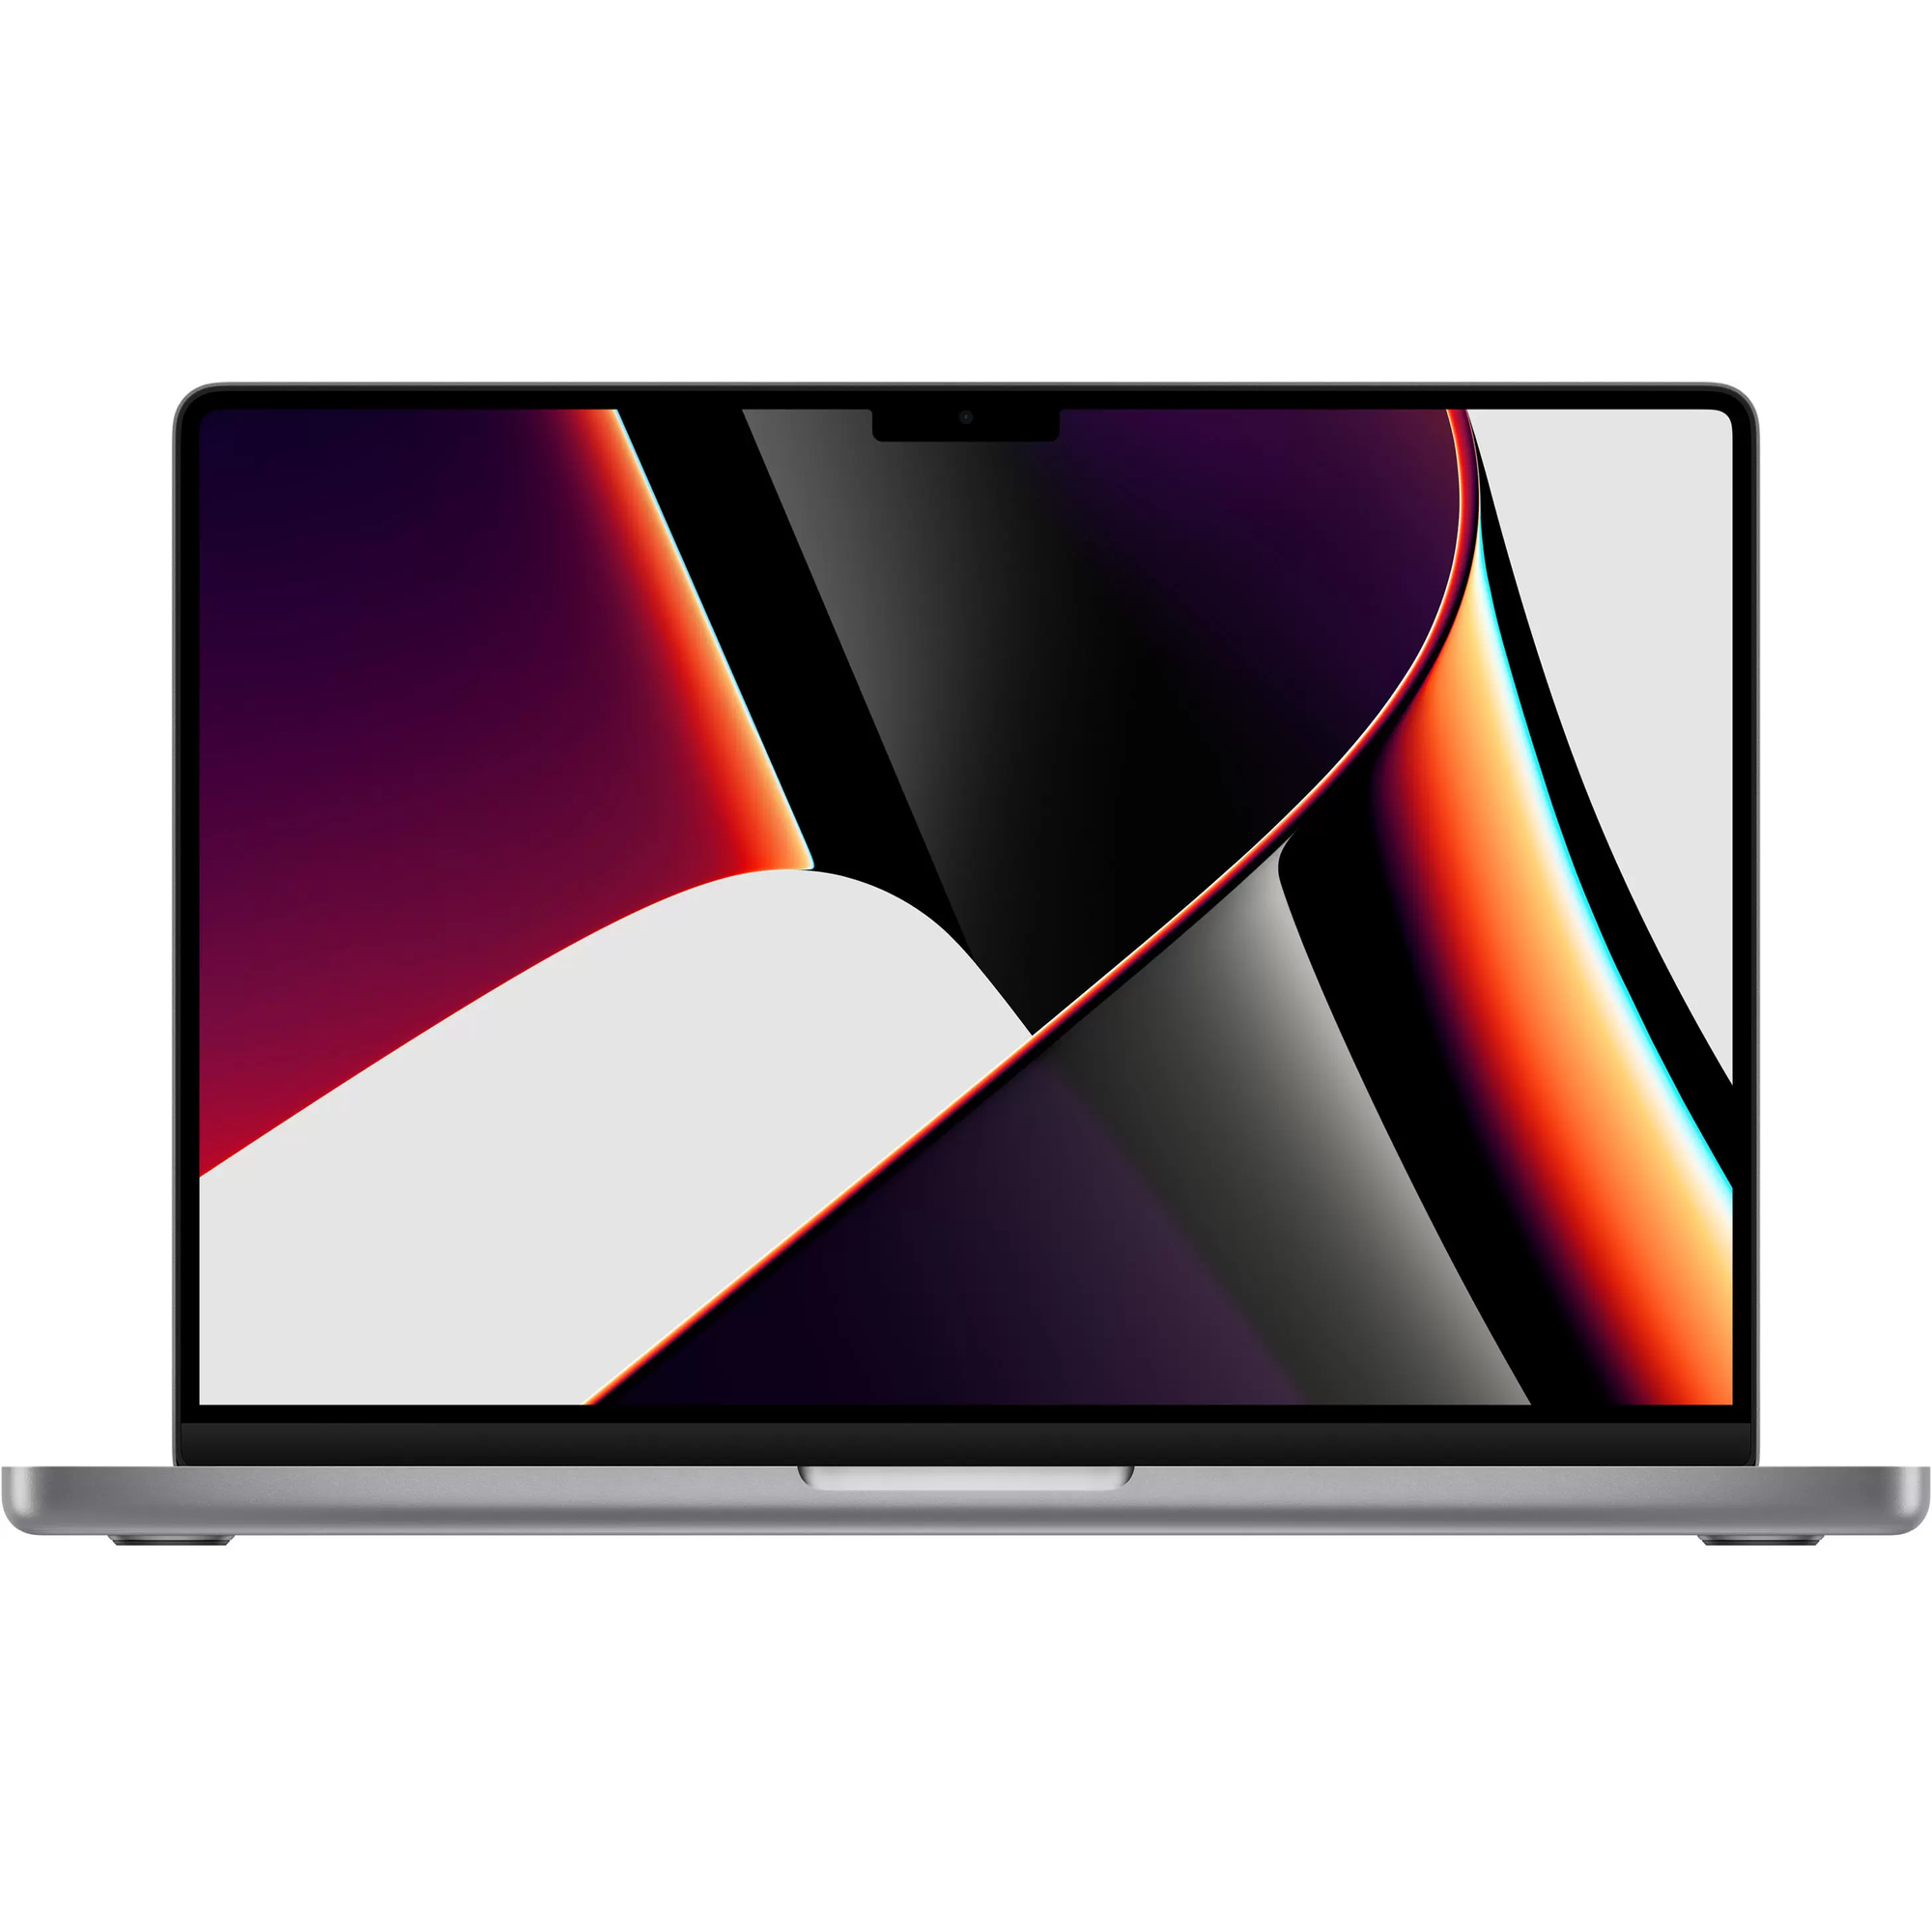 Apple MacBook Pro: Apple M1 Max chip with 10-core CPU and 32-core GPU/64GB /2TB SSD - Space Grey